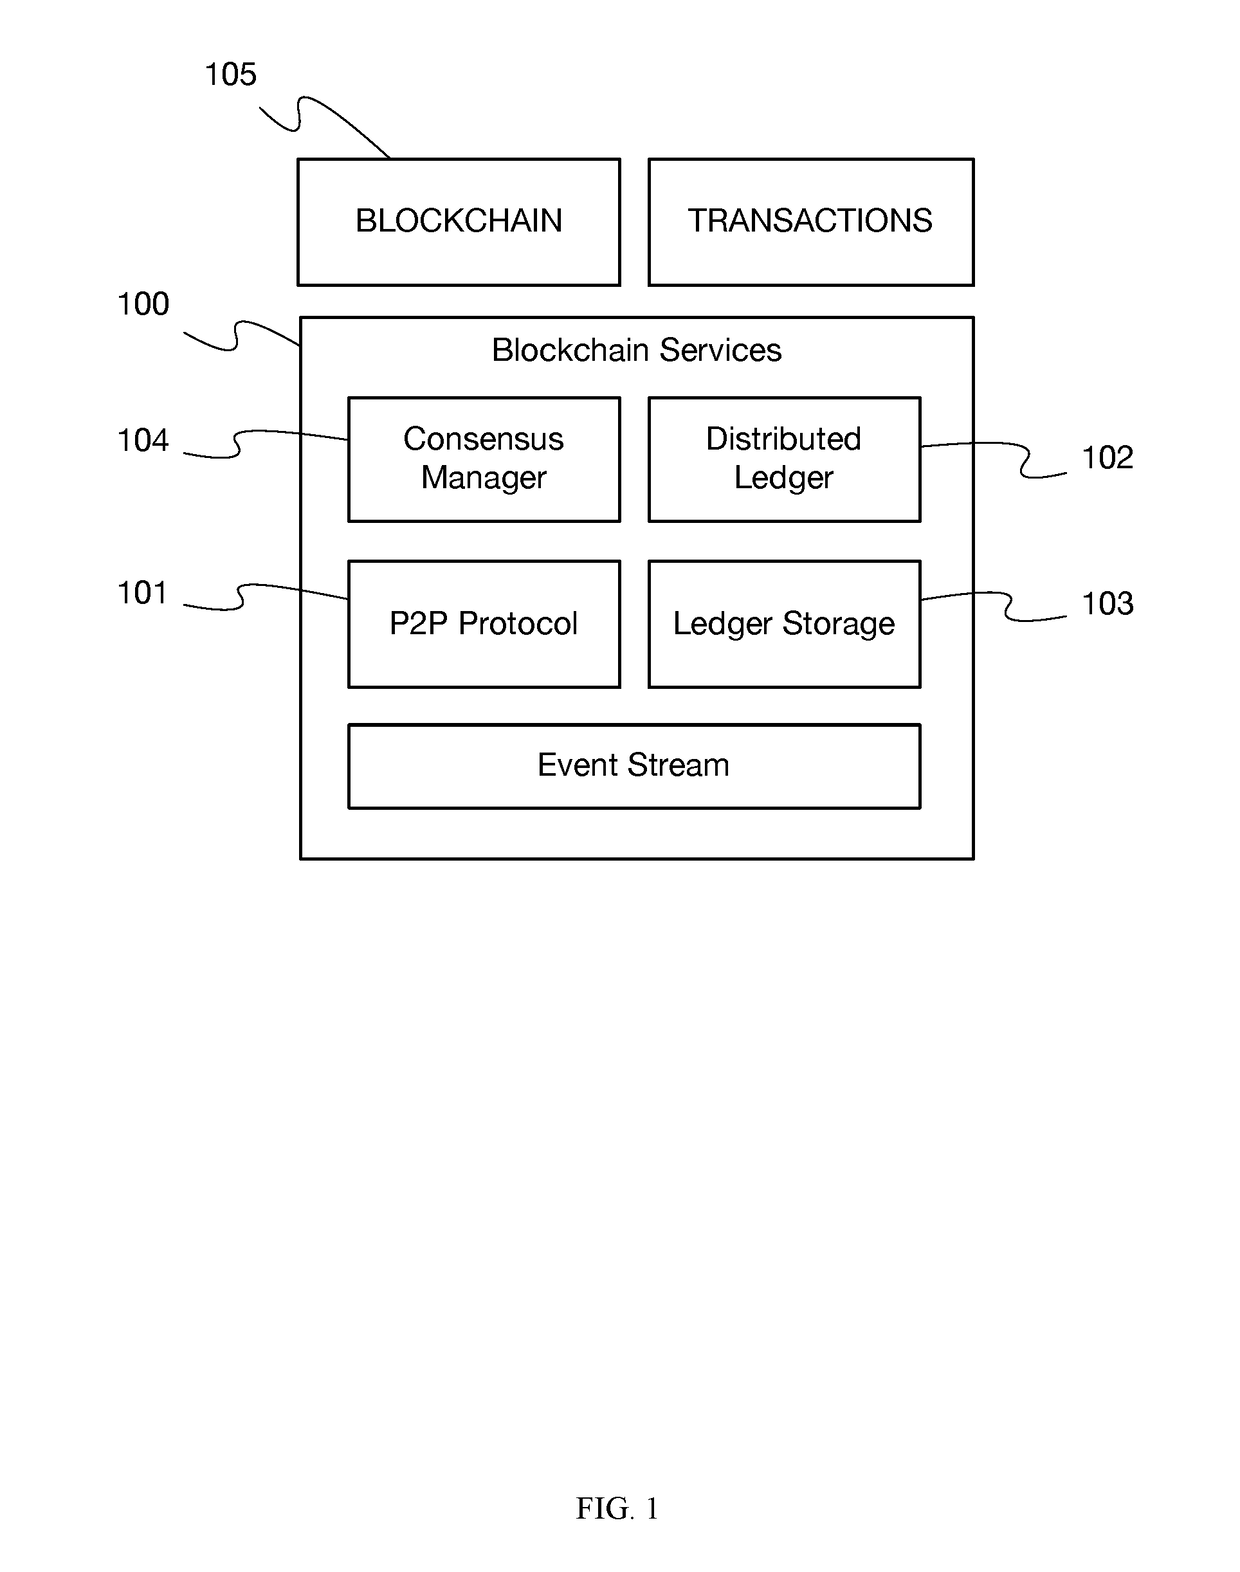 System and method for utilizing connected devices to enable secure and anonymous electronic interaction in a decentralized manner